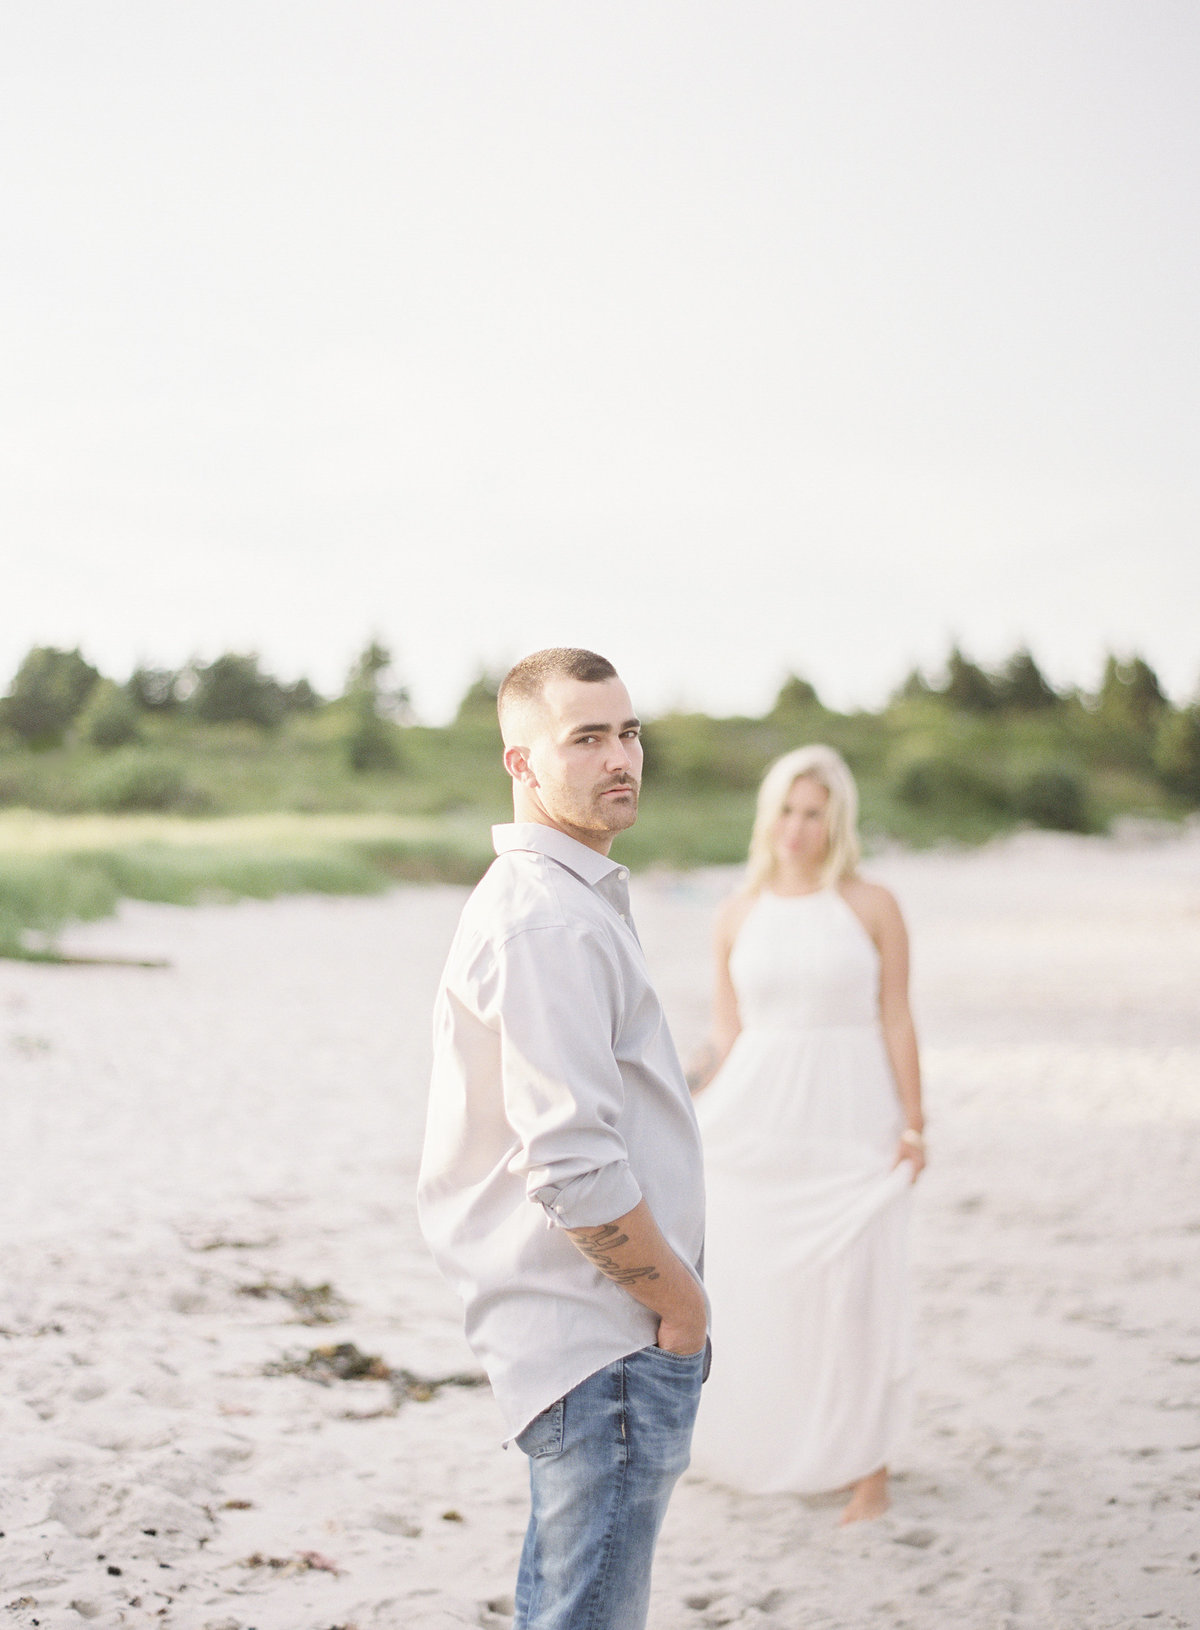 Jacqueline Anne Photography  - Hailey and Shea - Crystal Crescent Beach Engagement-72